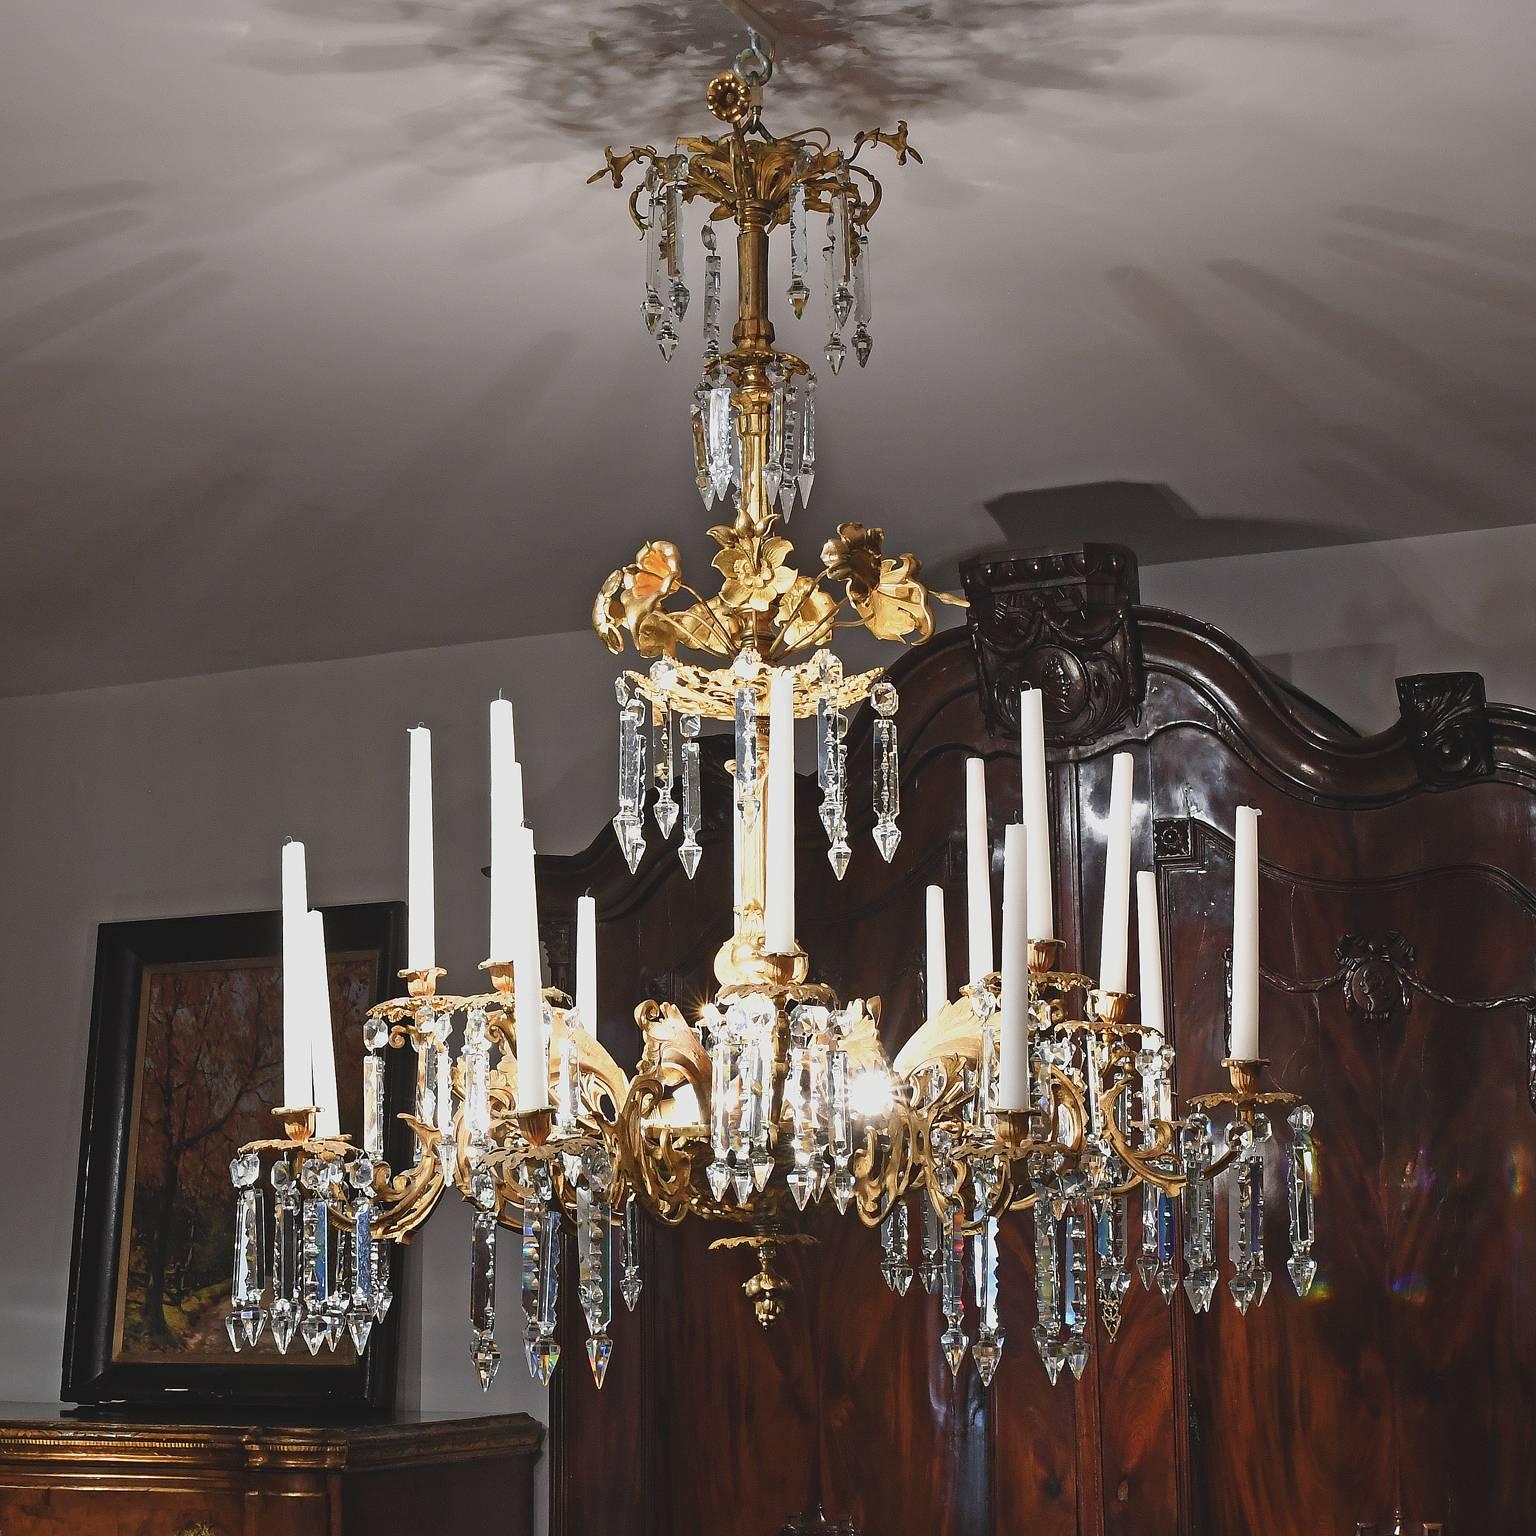 An elegant French Rococo-Style chandelier in gilt bronze with beautiful glass crystal prisms, that holds 16 candles but has also been electrified to accommodate six 25-watt candelabra bulbs. Bulbs are located on top of the bottom dish where the arms